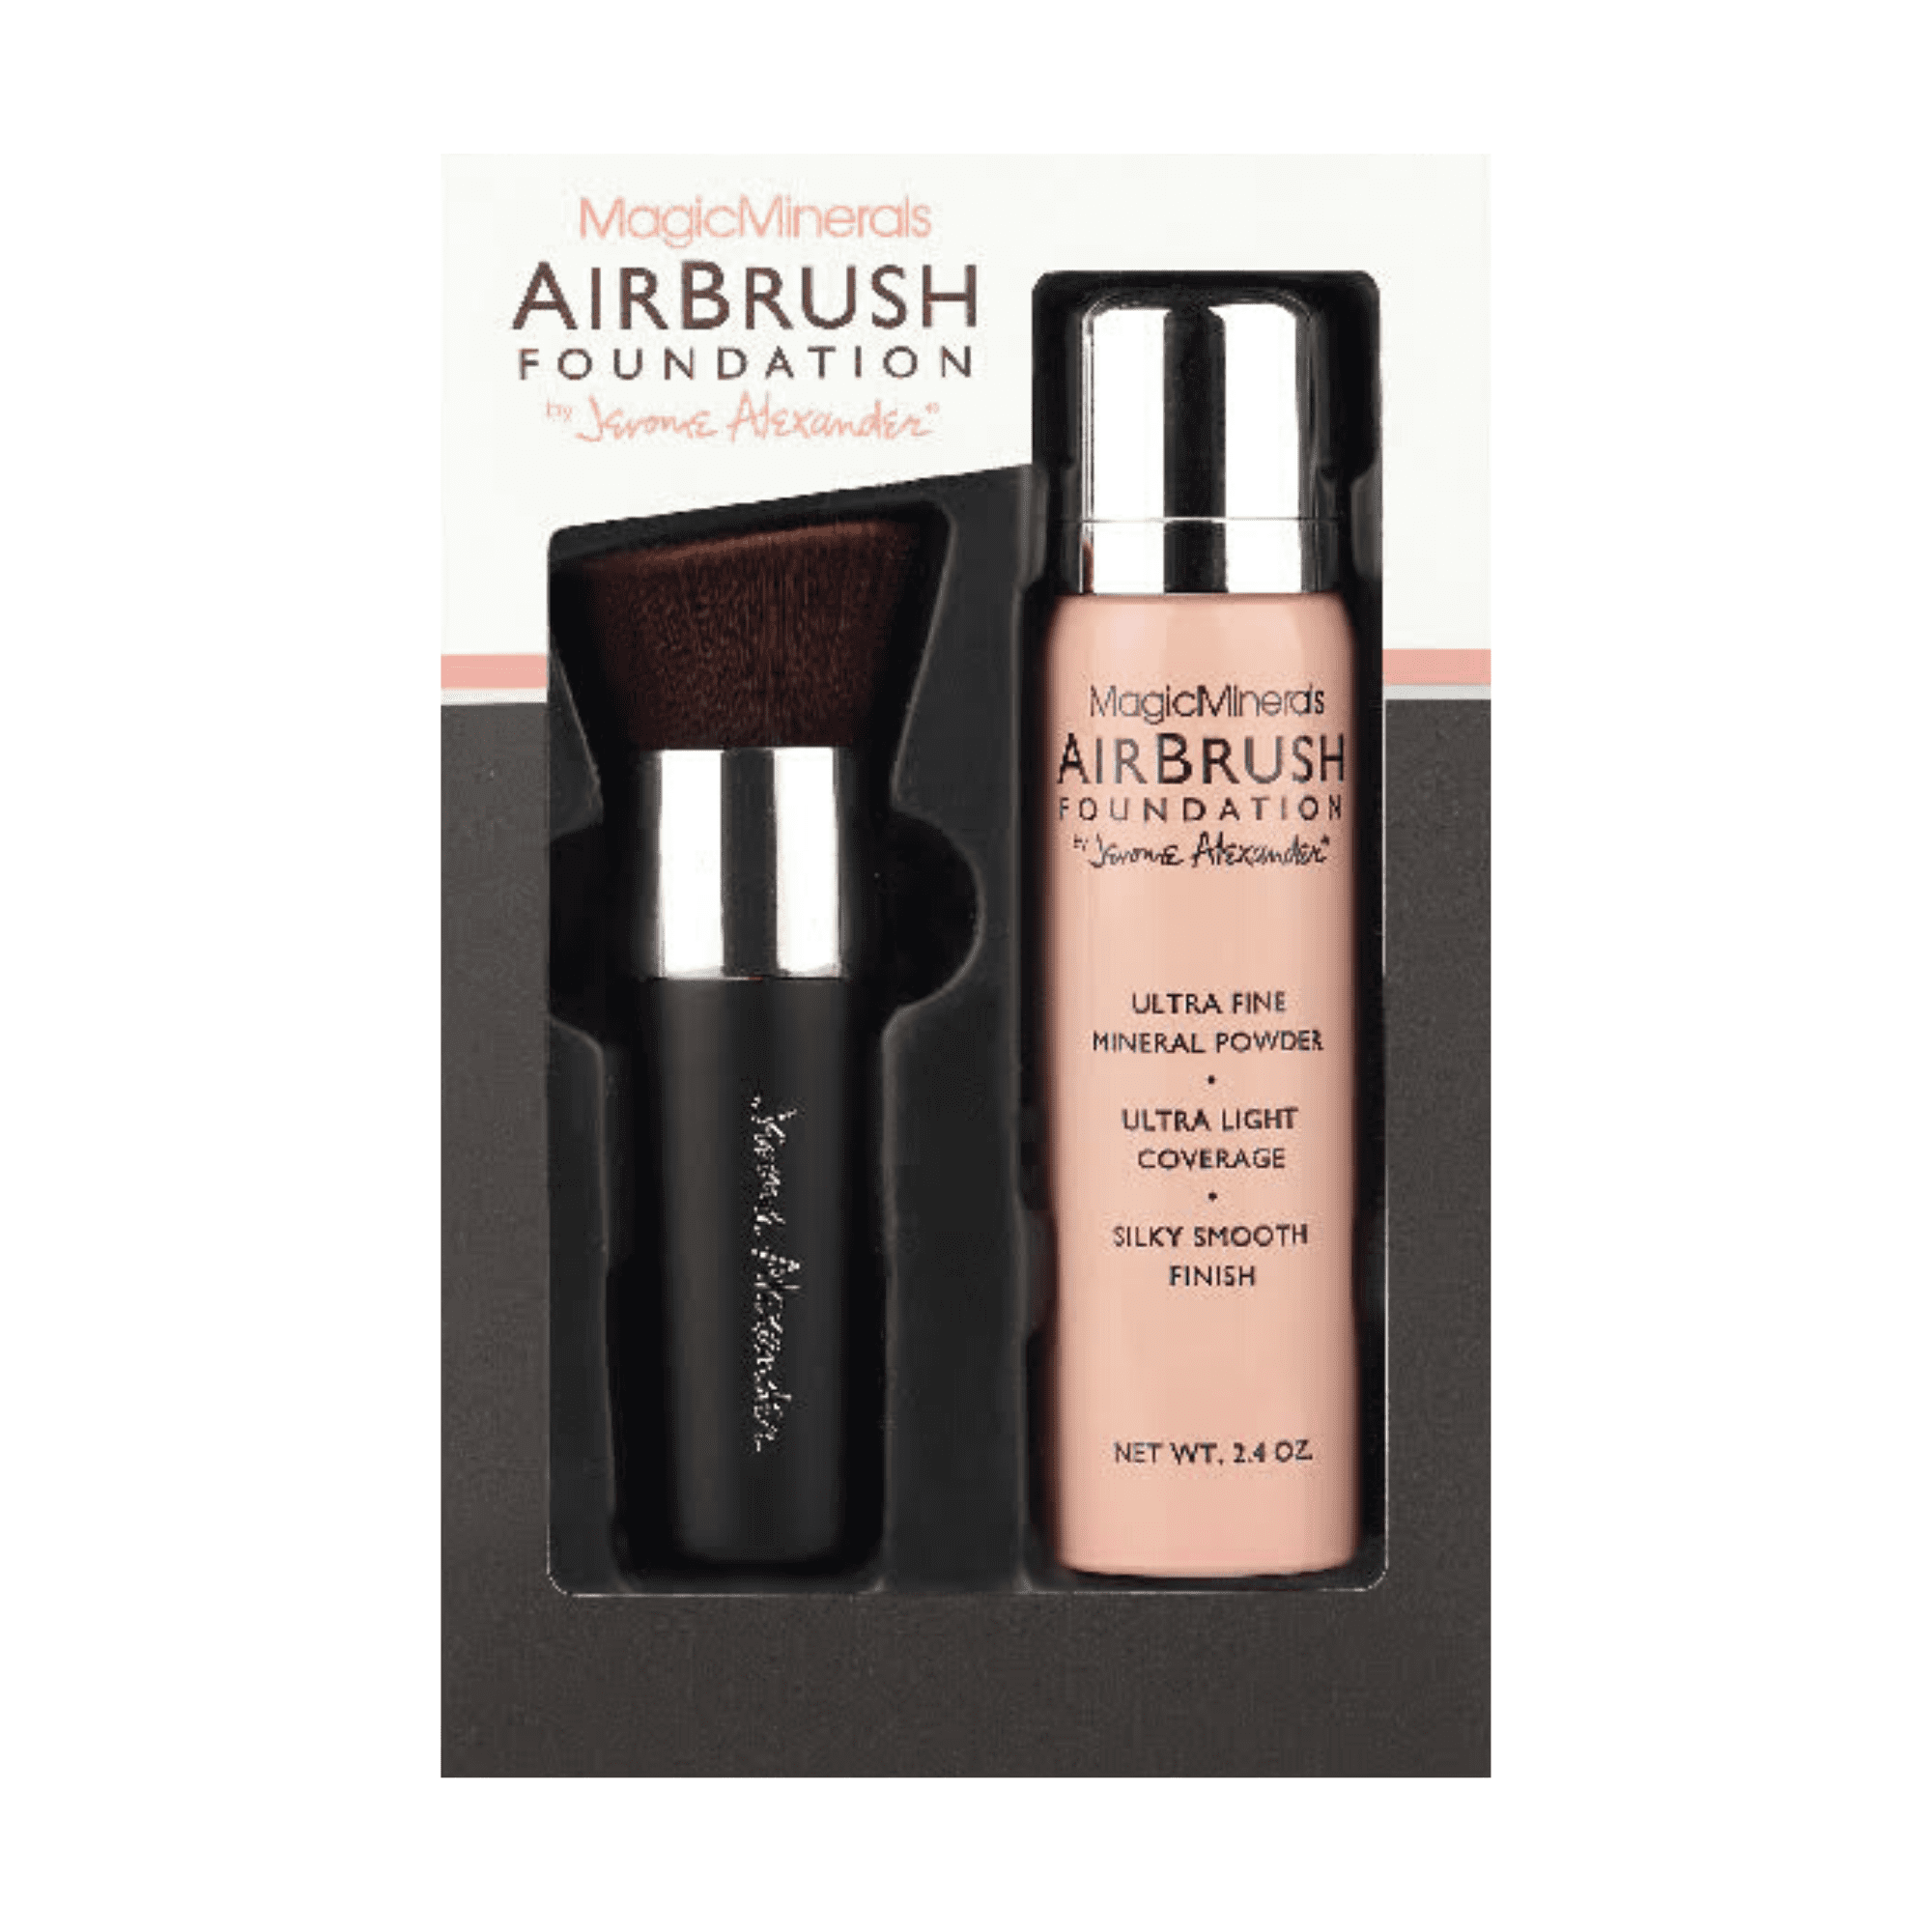 MagicMinerals AirBrush Foundation by Jerome Alexander, 2 Piece Set AirBrush Foundation and